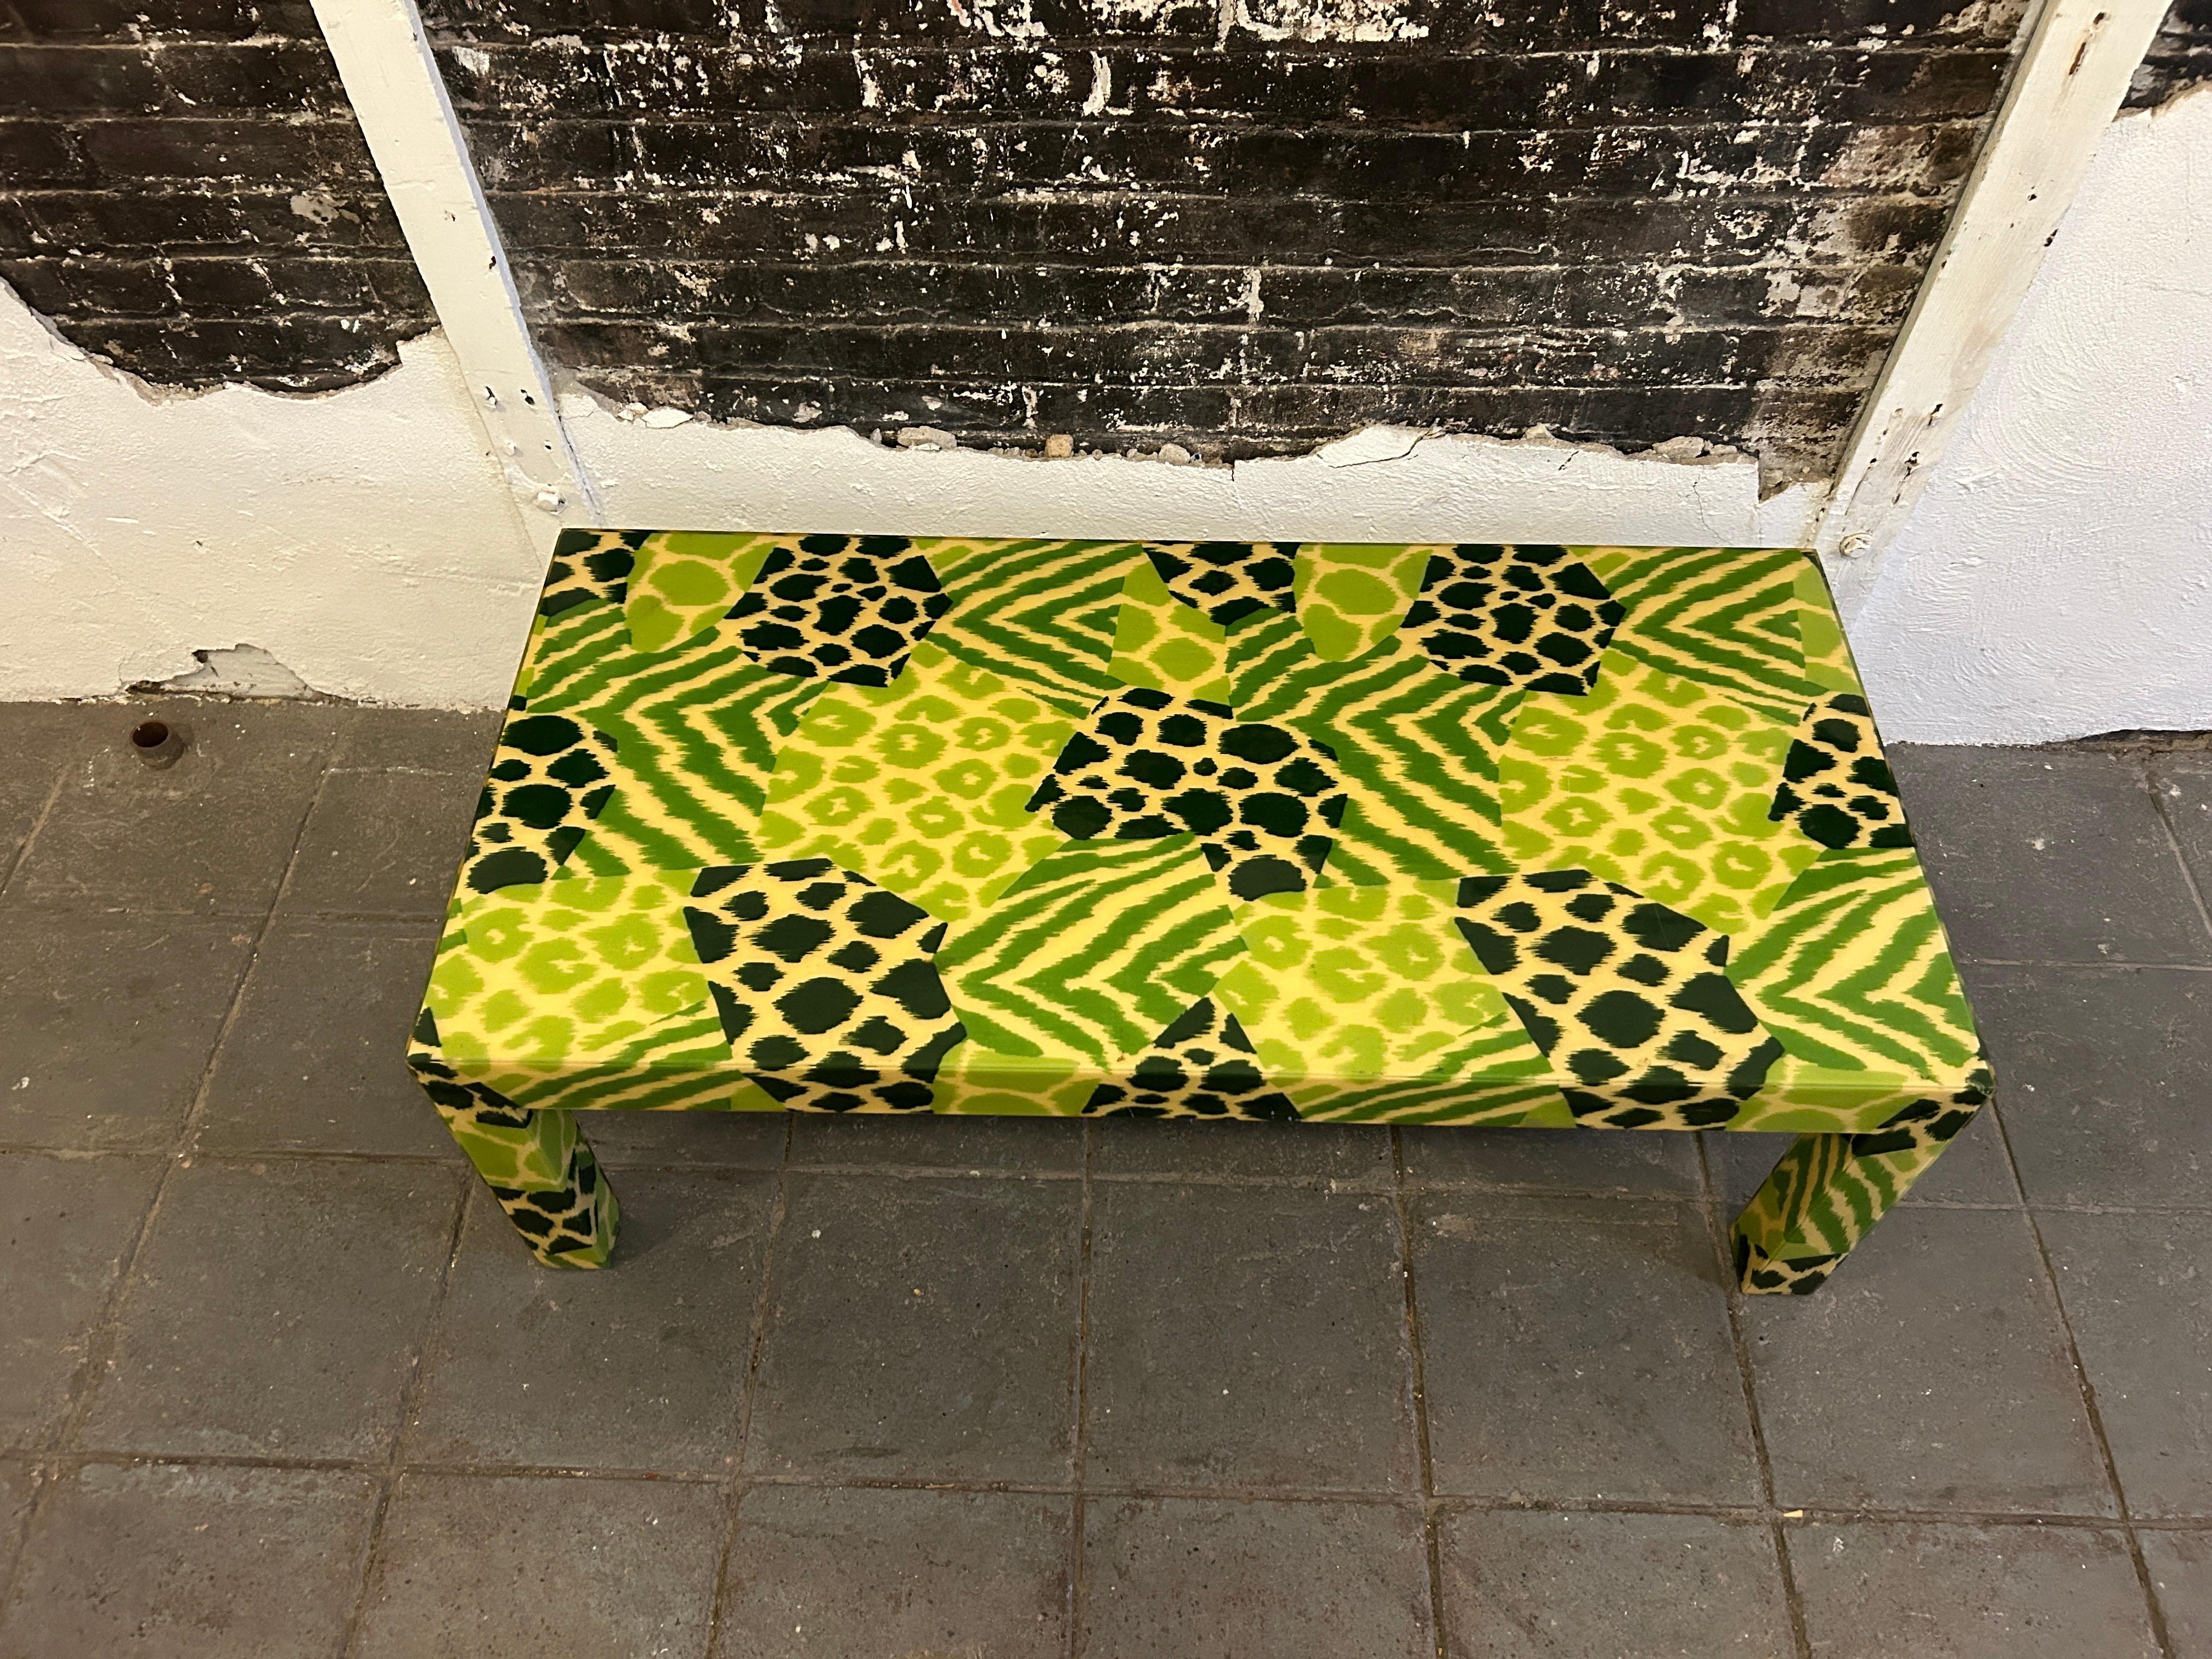 Mid Century Safari Print Resin Parsons Coffee Table style of Karl springer or Milo Baughman. A designer coffee or cocktail table. Mid Century Post Modern featuring an eye catching safari design fabric Print in Greens, with leopard, tiger, zebra,